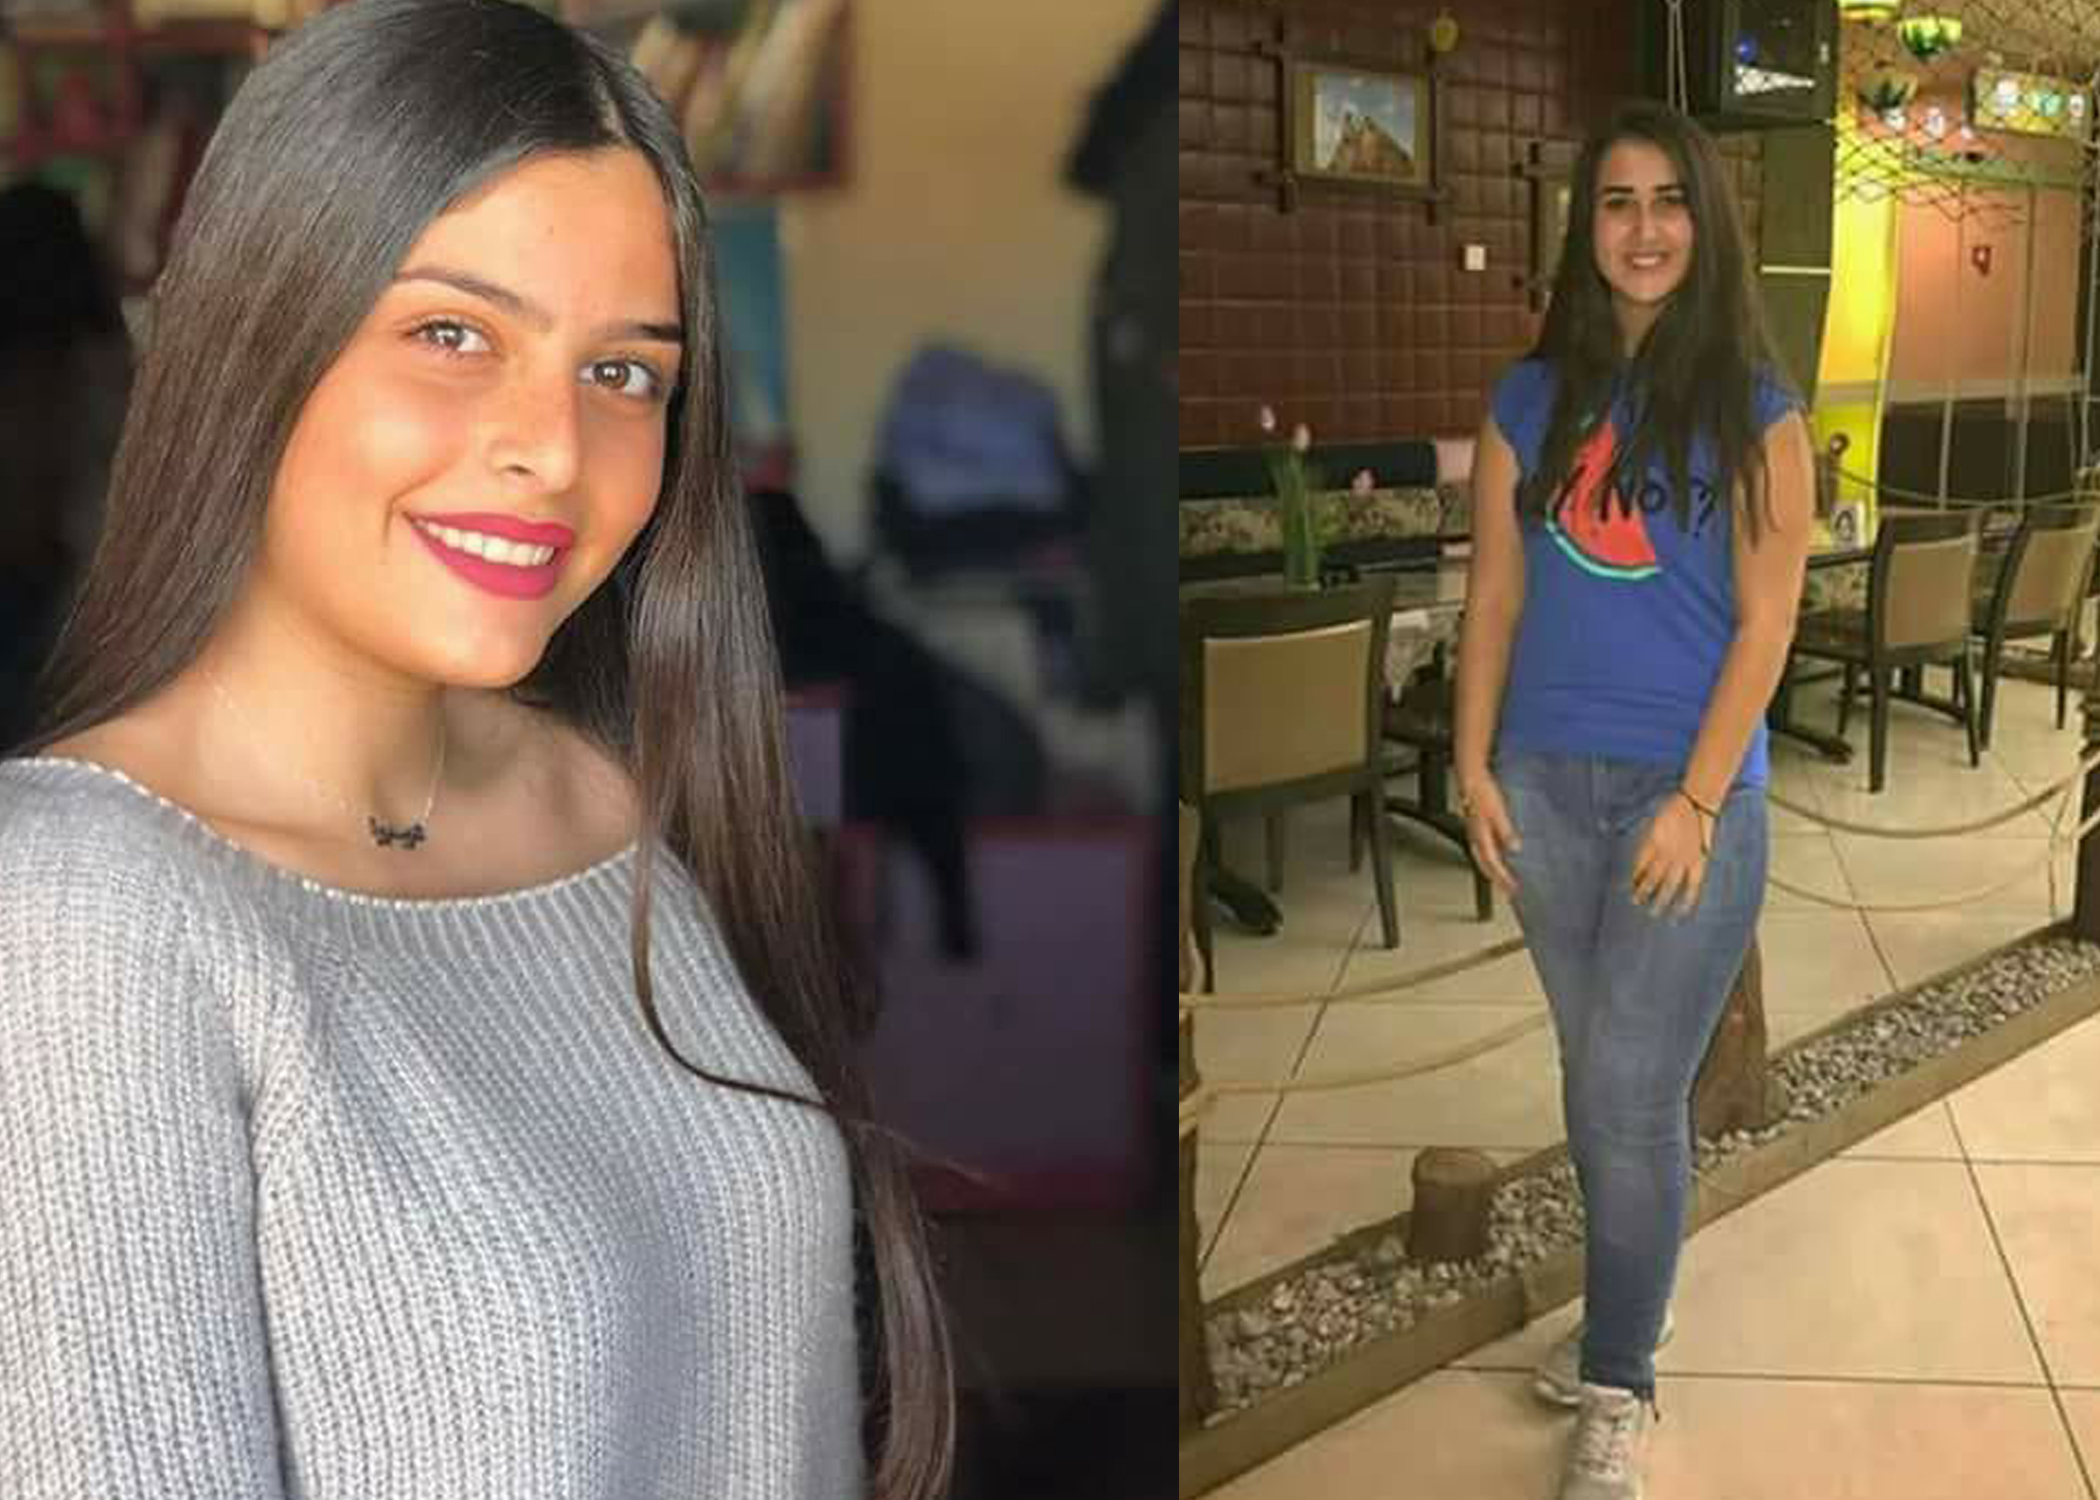 Rita Eid (right), aged 17, was killed in rocket attack and Christine Hourani, also 17, was badly injured (Photographs courtesy of the Melkite Greek Catholic Patriarchate – Damascus/Beirut)